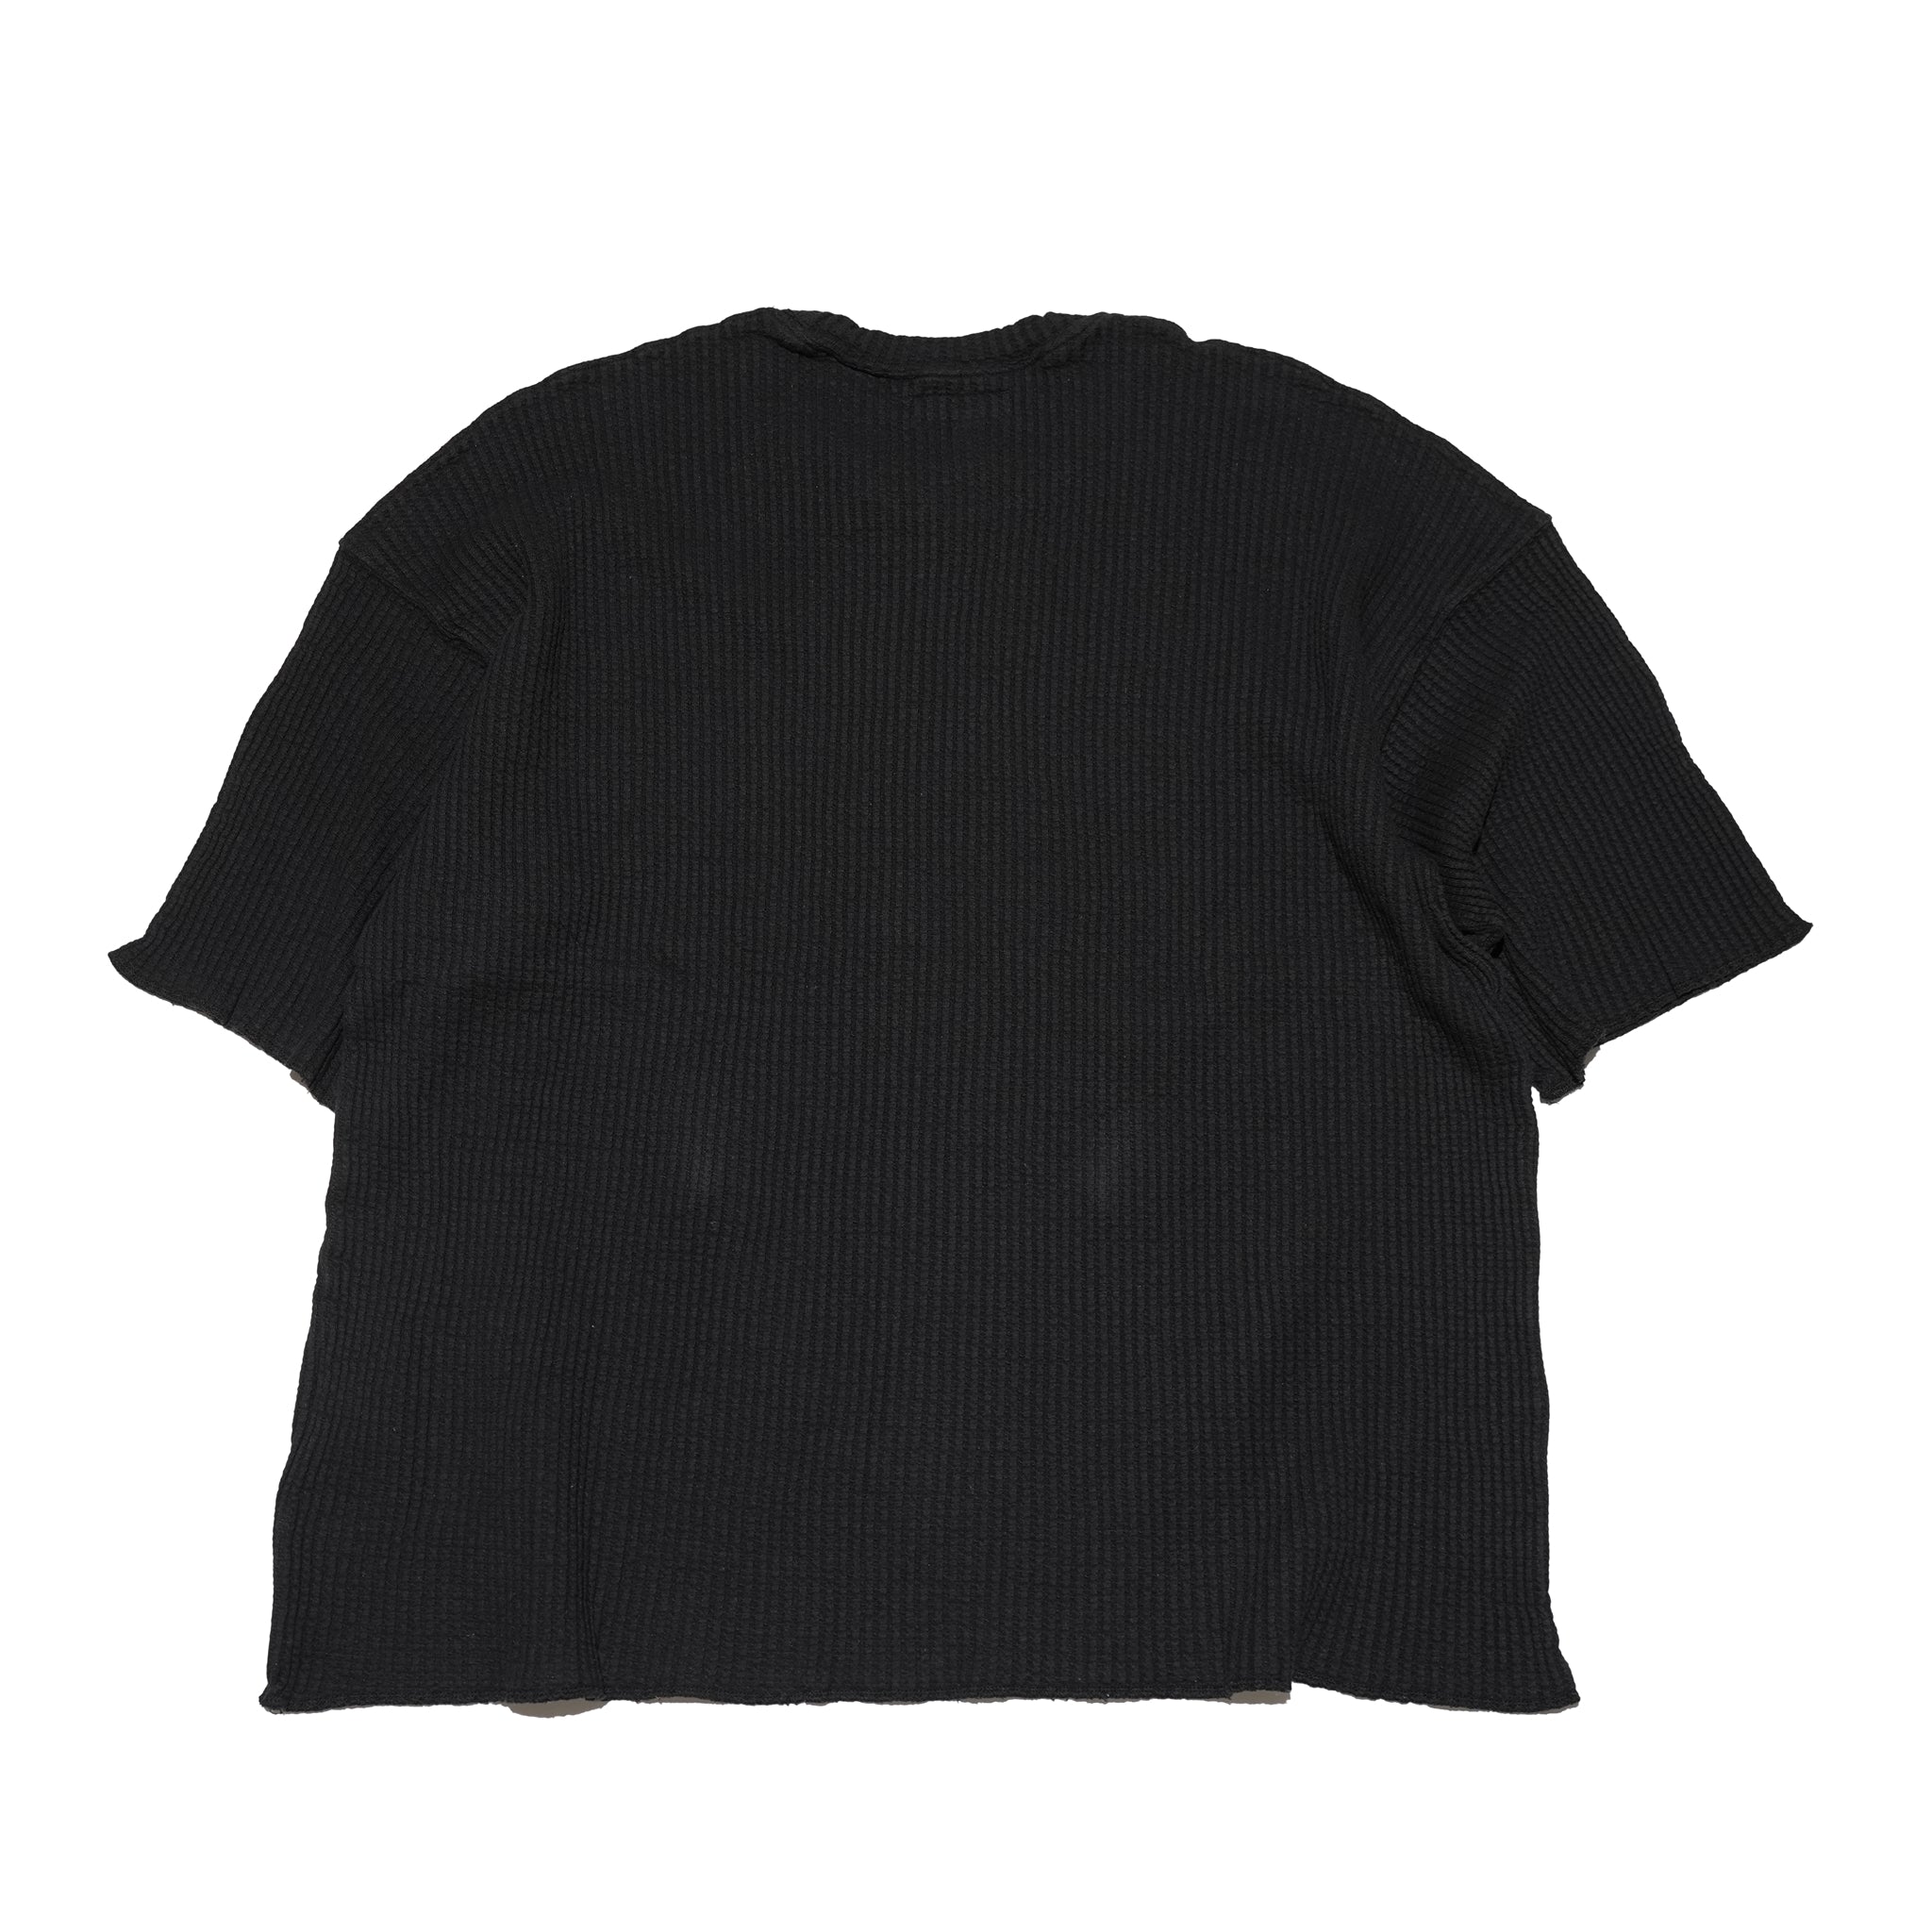 No:M31752-2 | Name:Thermal Cut Off Edges S/S | Color:Black【MONITALY_モニタリー】